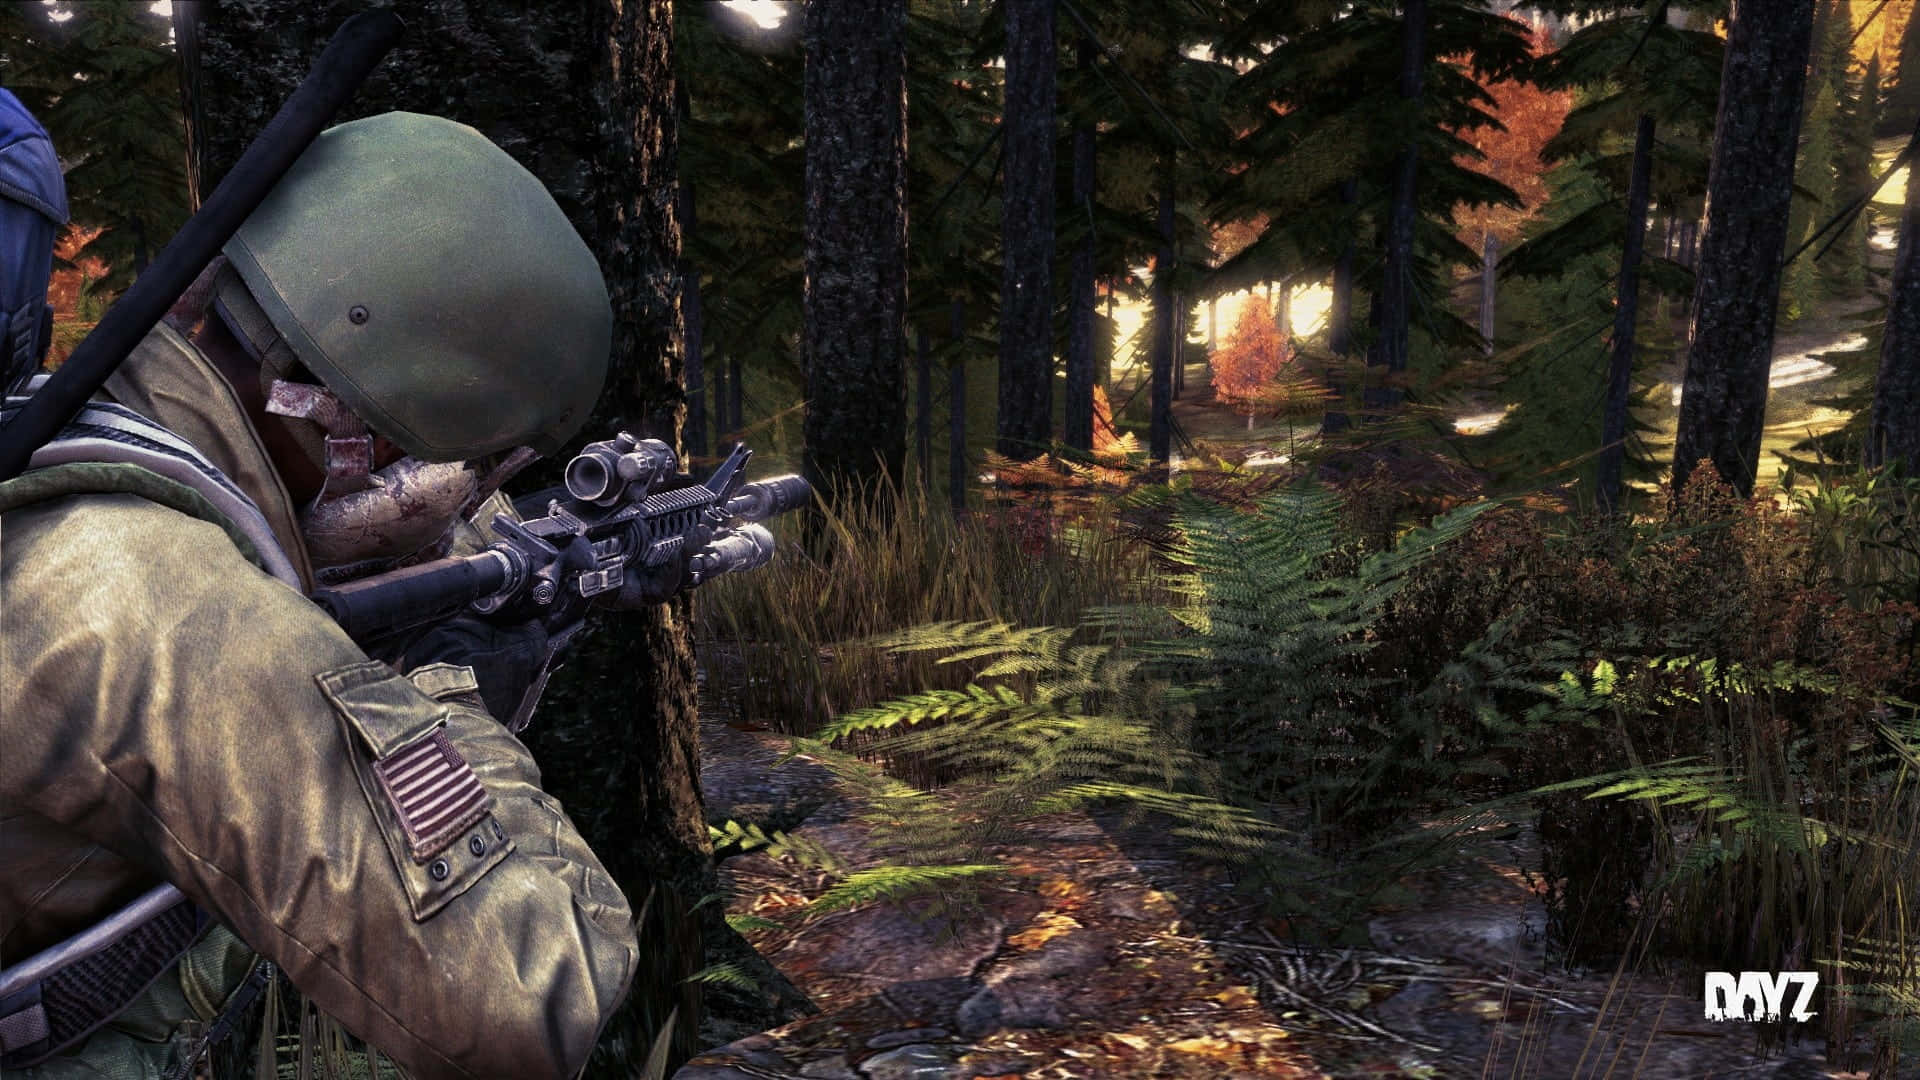 A Soldier Is In The Woods With A Rifle